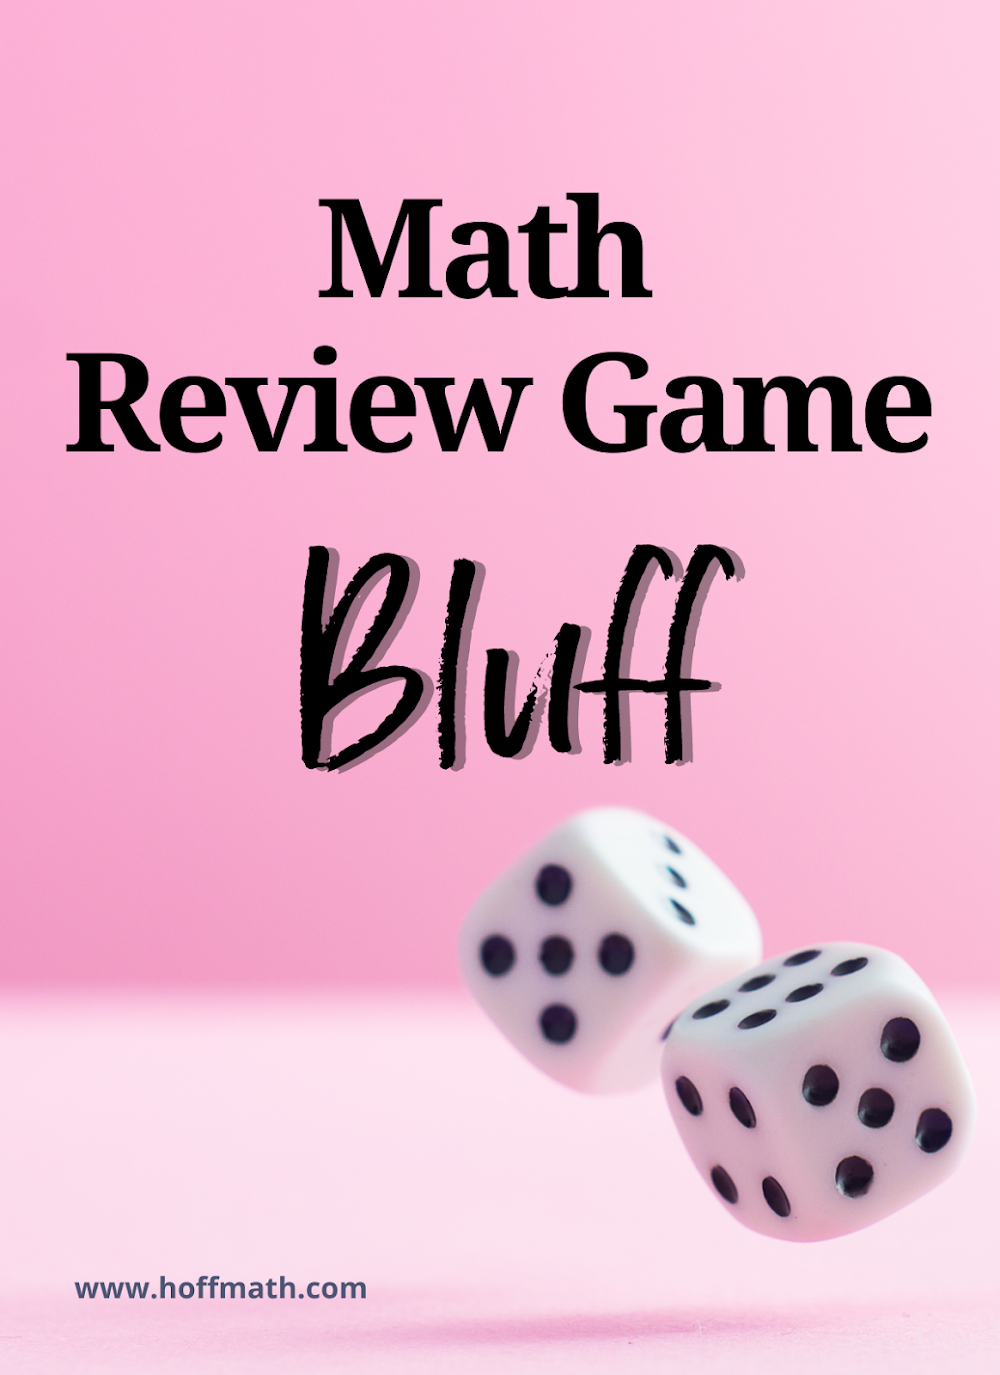 Math Review Game 